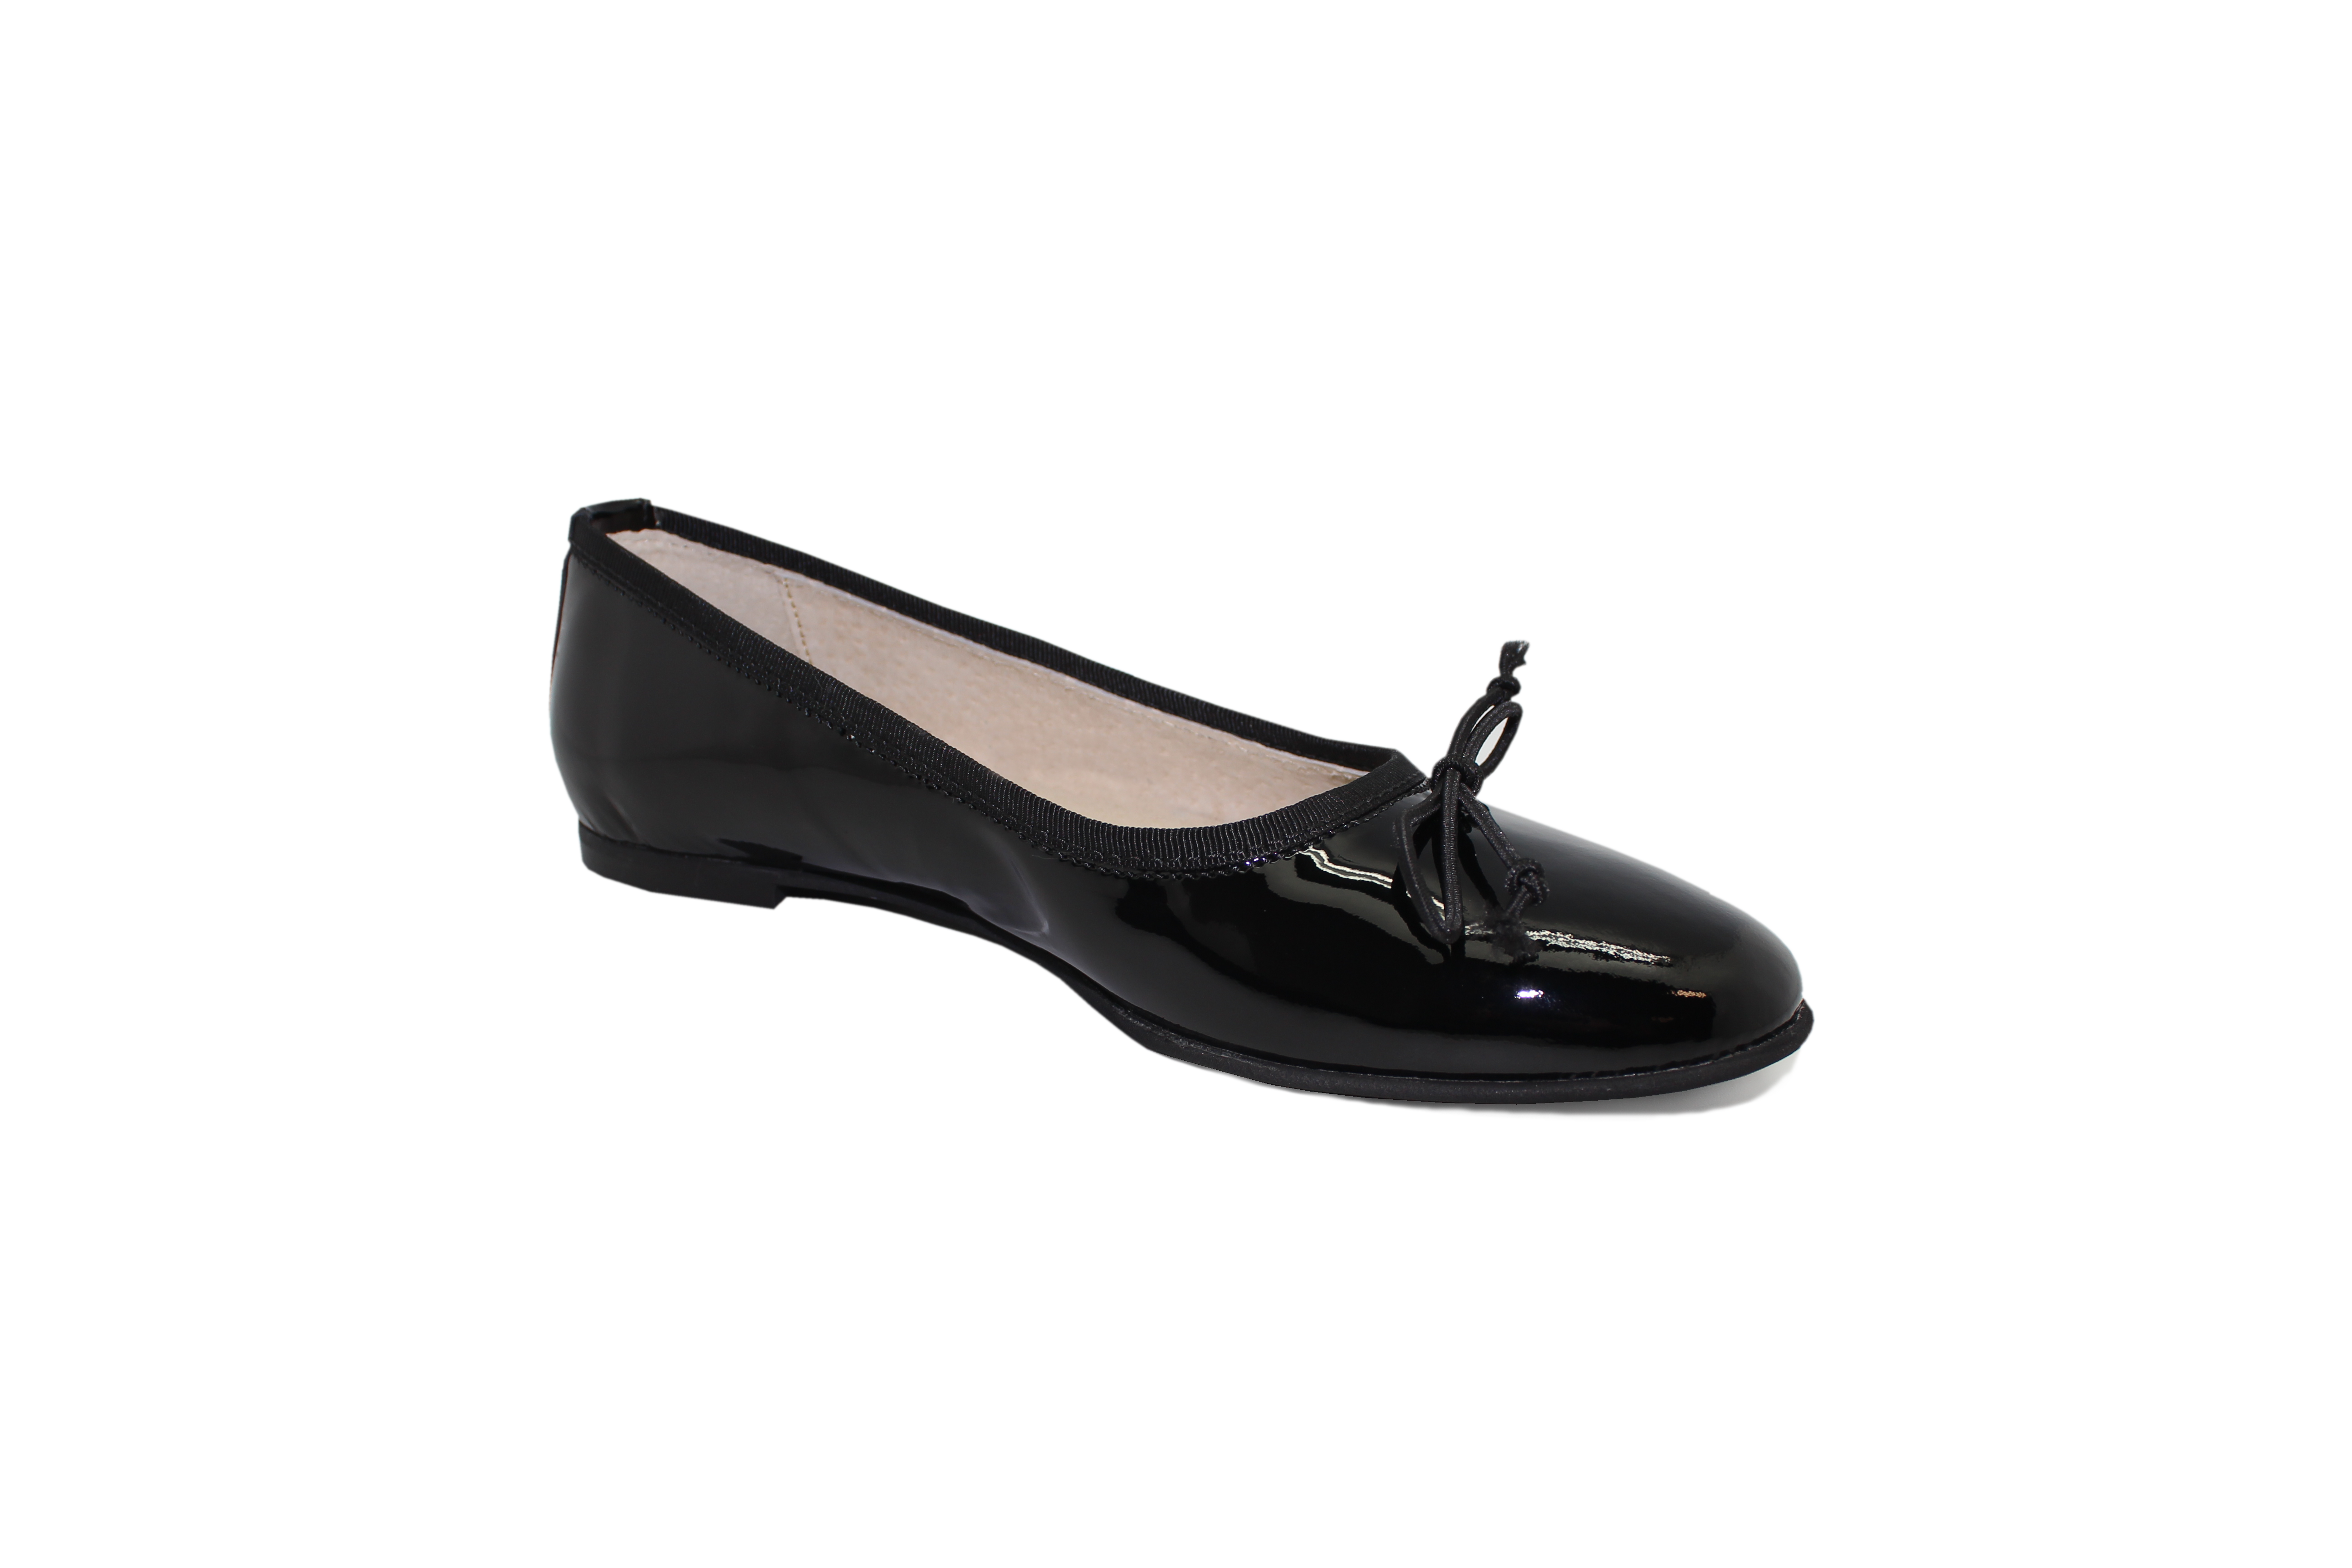 Art.152411-03 Ballerina patent-leather shoes